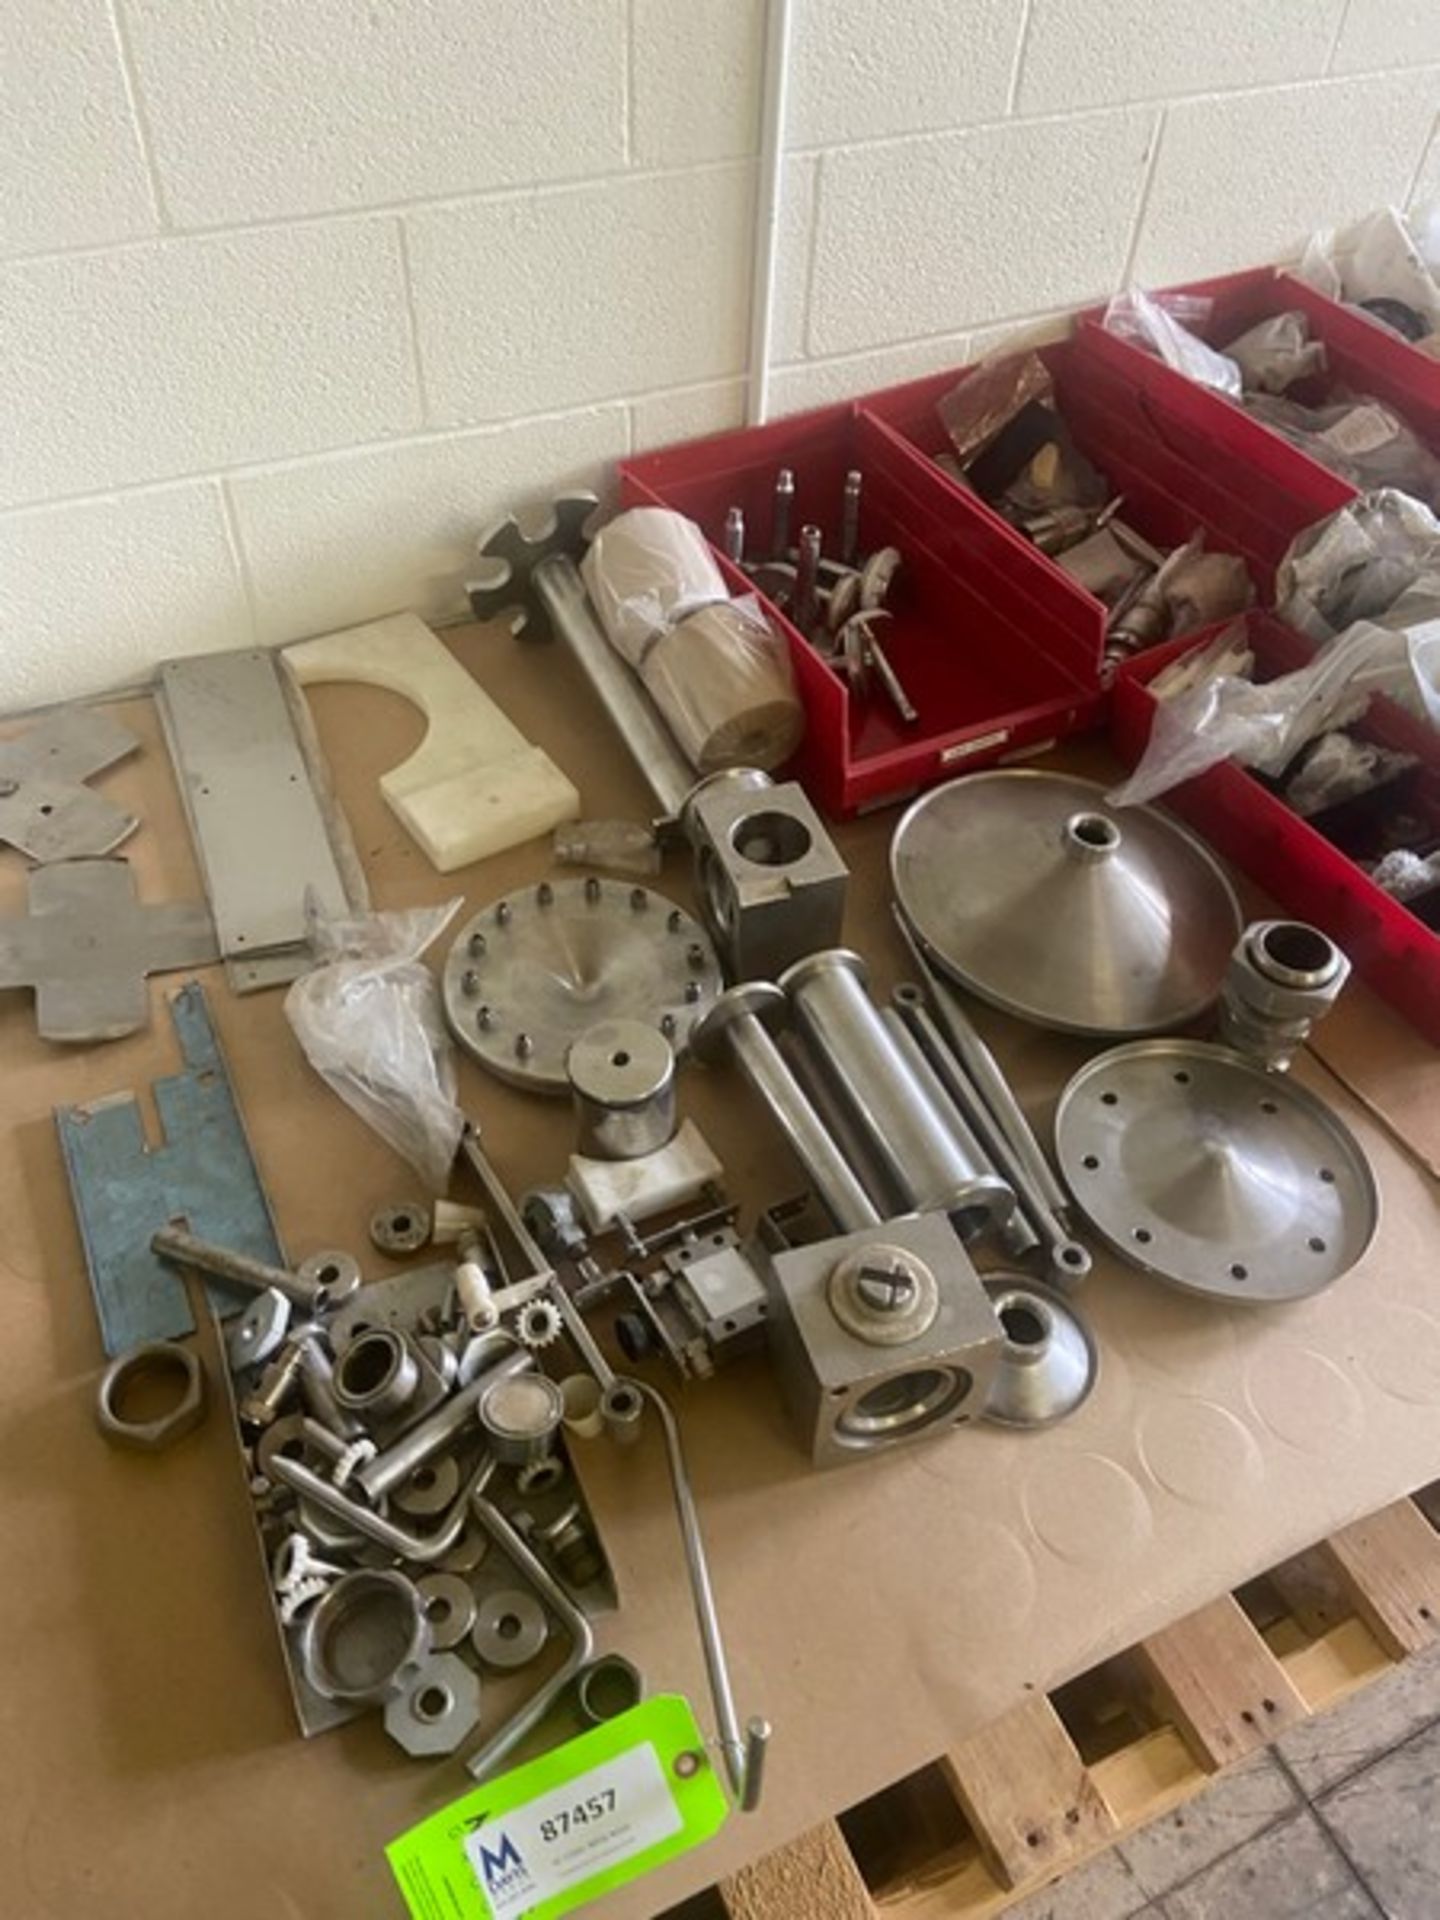 Large Assortment of NEW Parts with Parts Bins, Includes S/S Pump Parts, Air Valve Parts, Gaskets, - Image 2 of 9